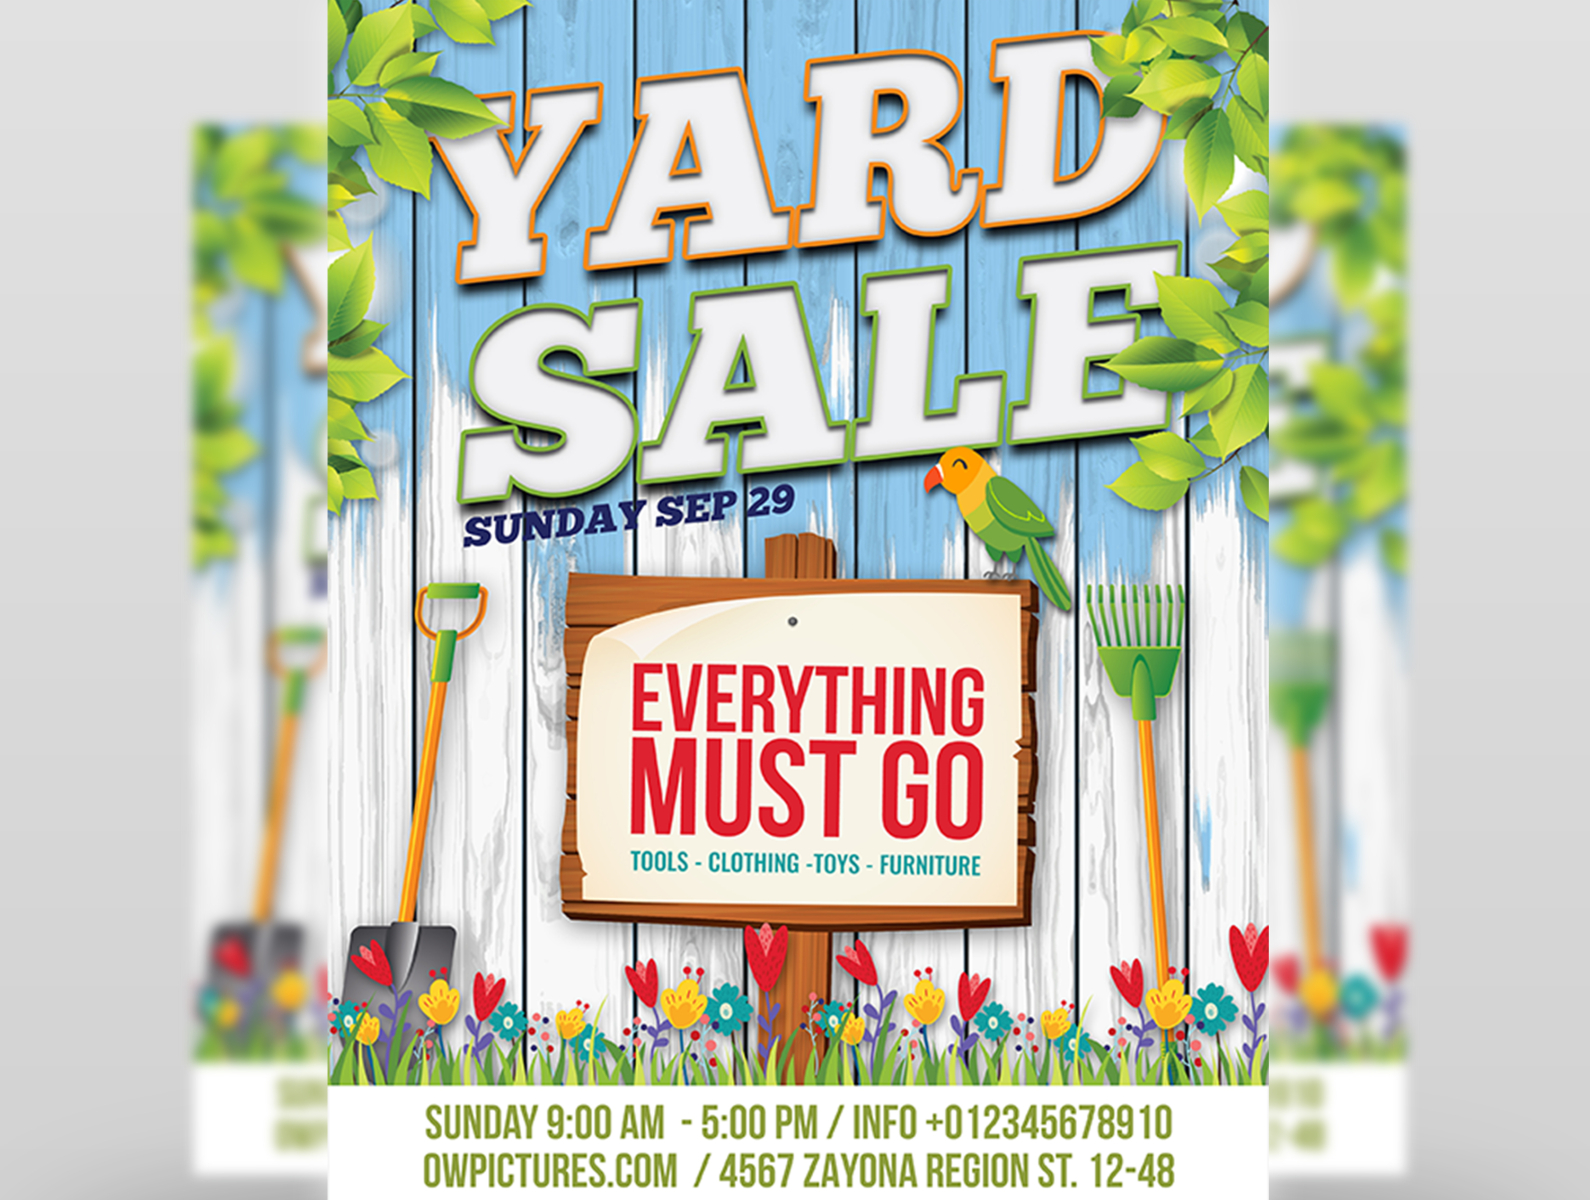 Yard Sale - Garage Sales Flyer Template by OWPictures on Dribbble Pertaining To Yard Sale Flyer Template